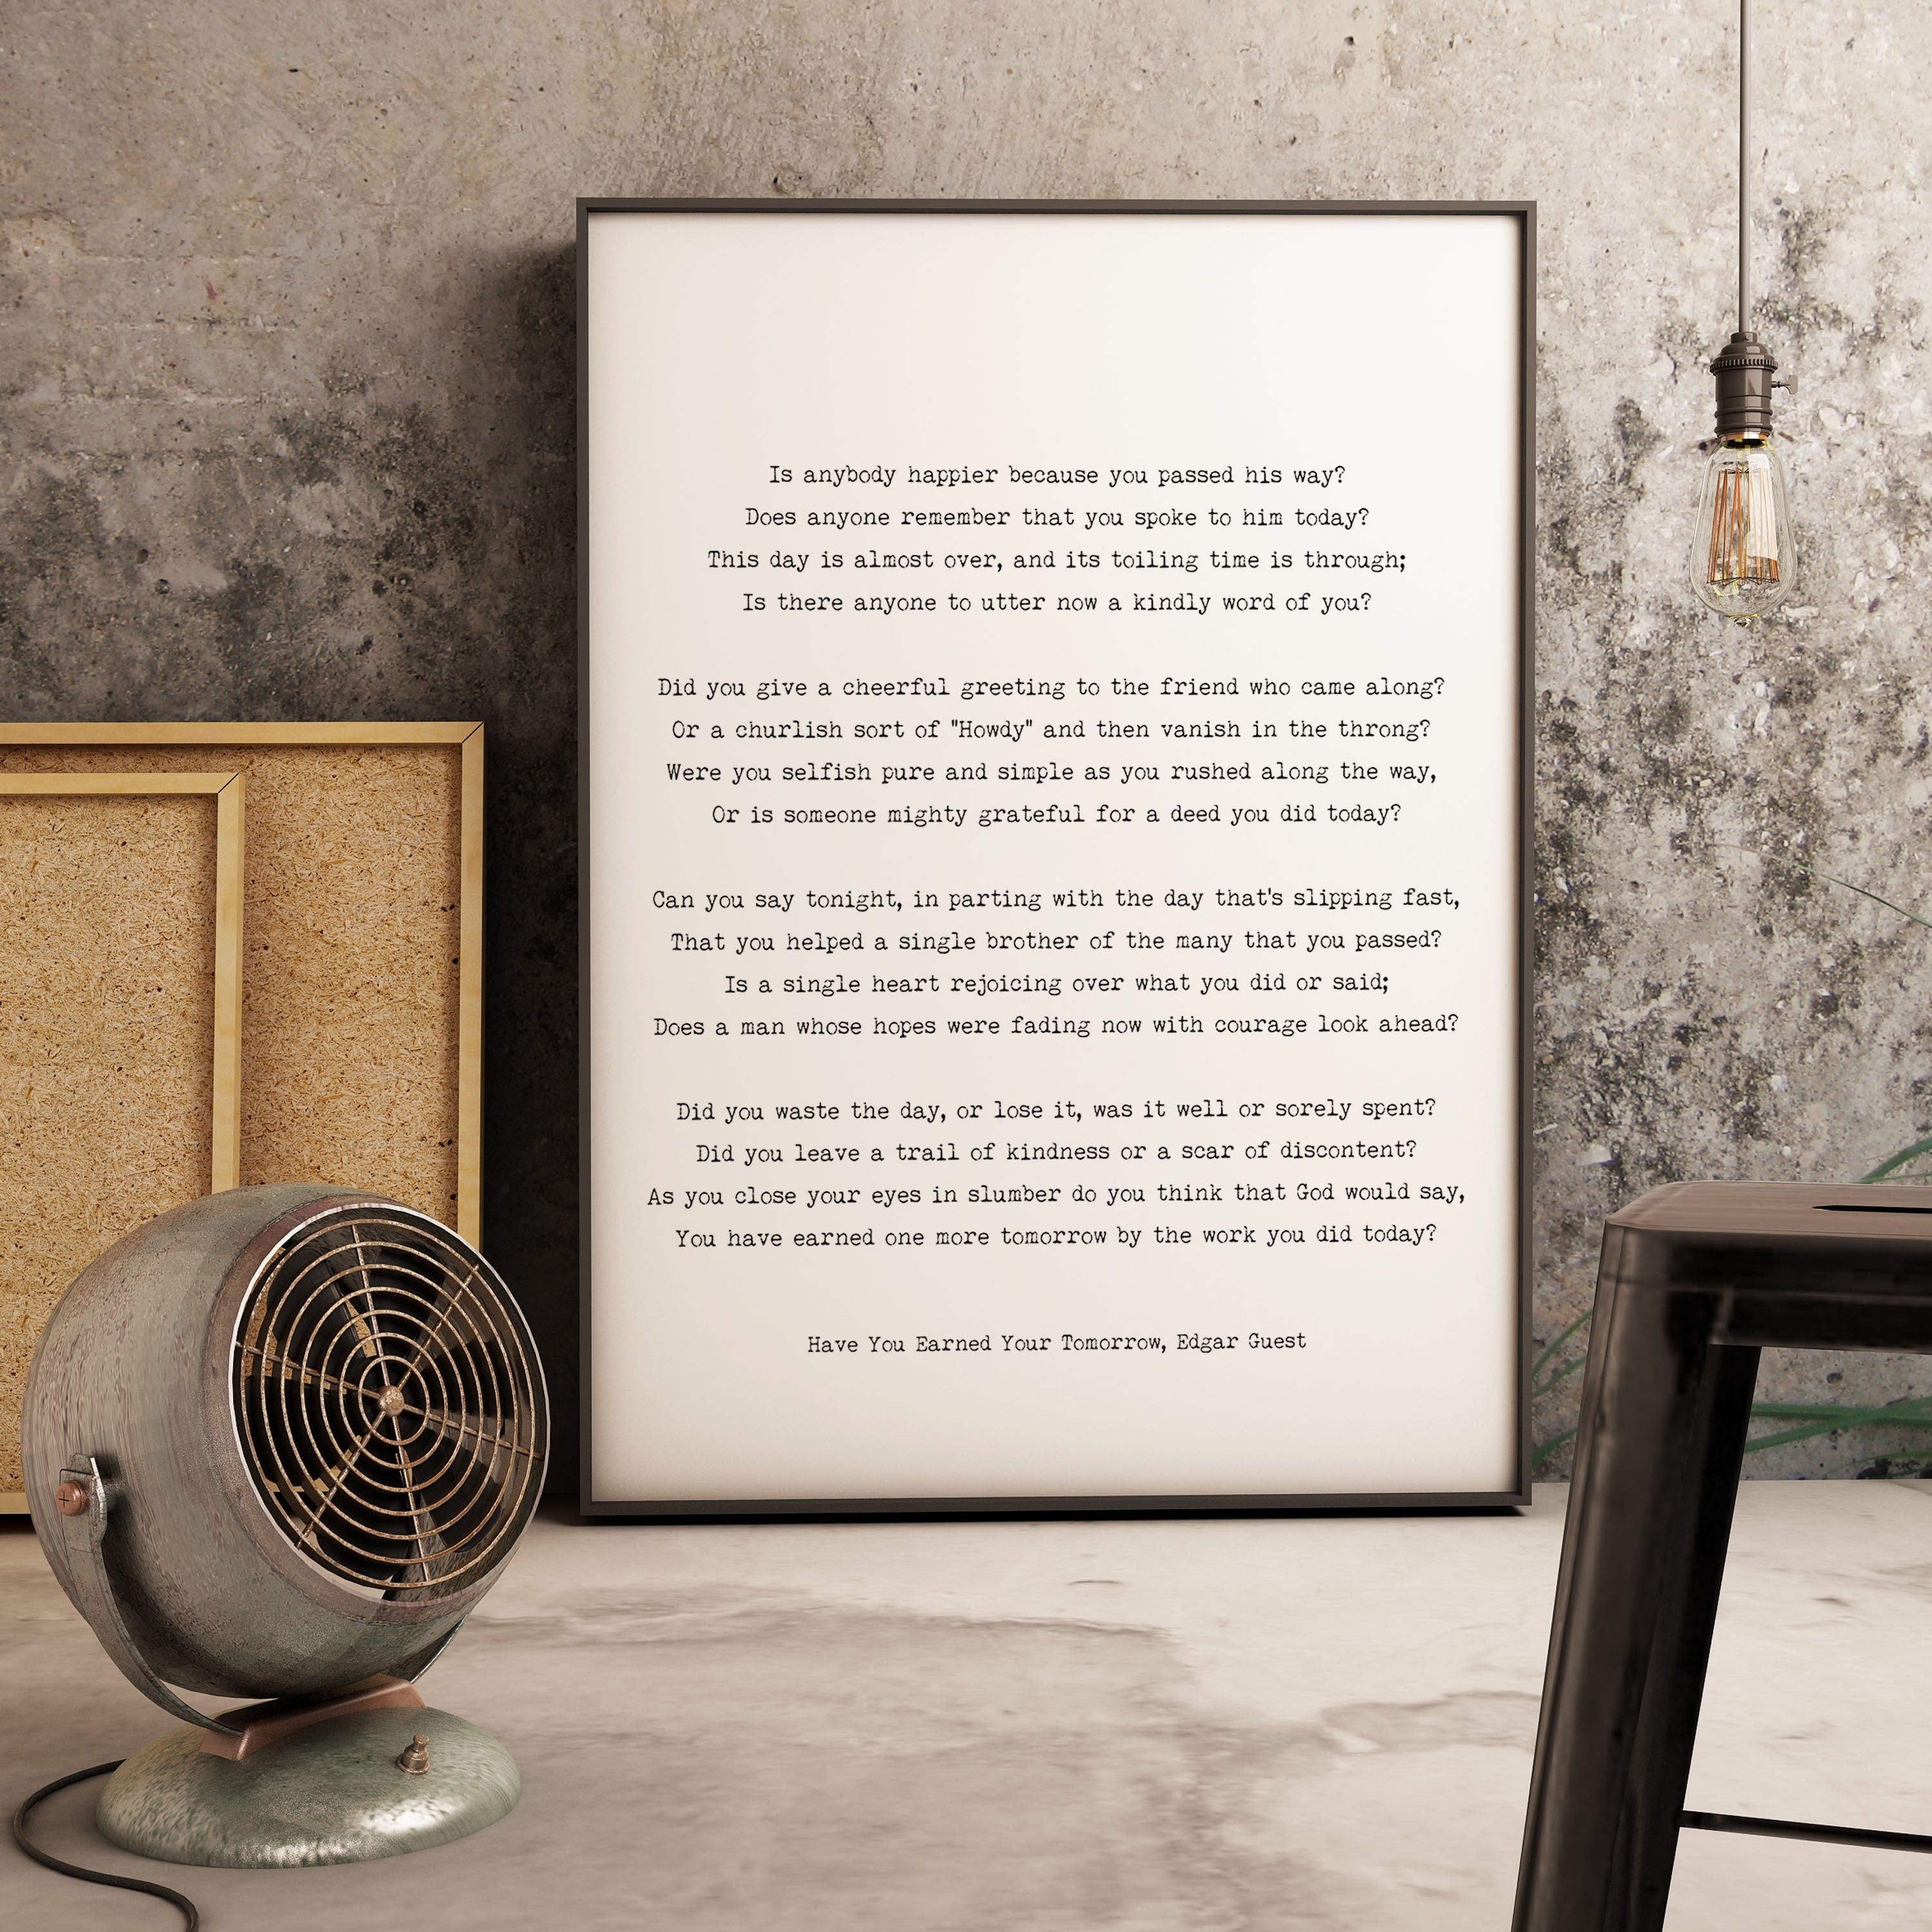 Have You Earned Your Tomorrow Edgar Guest Poem, Unframed Black & White Poetry Wall Art Prints